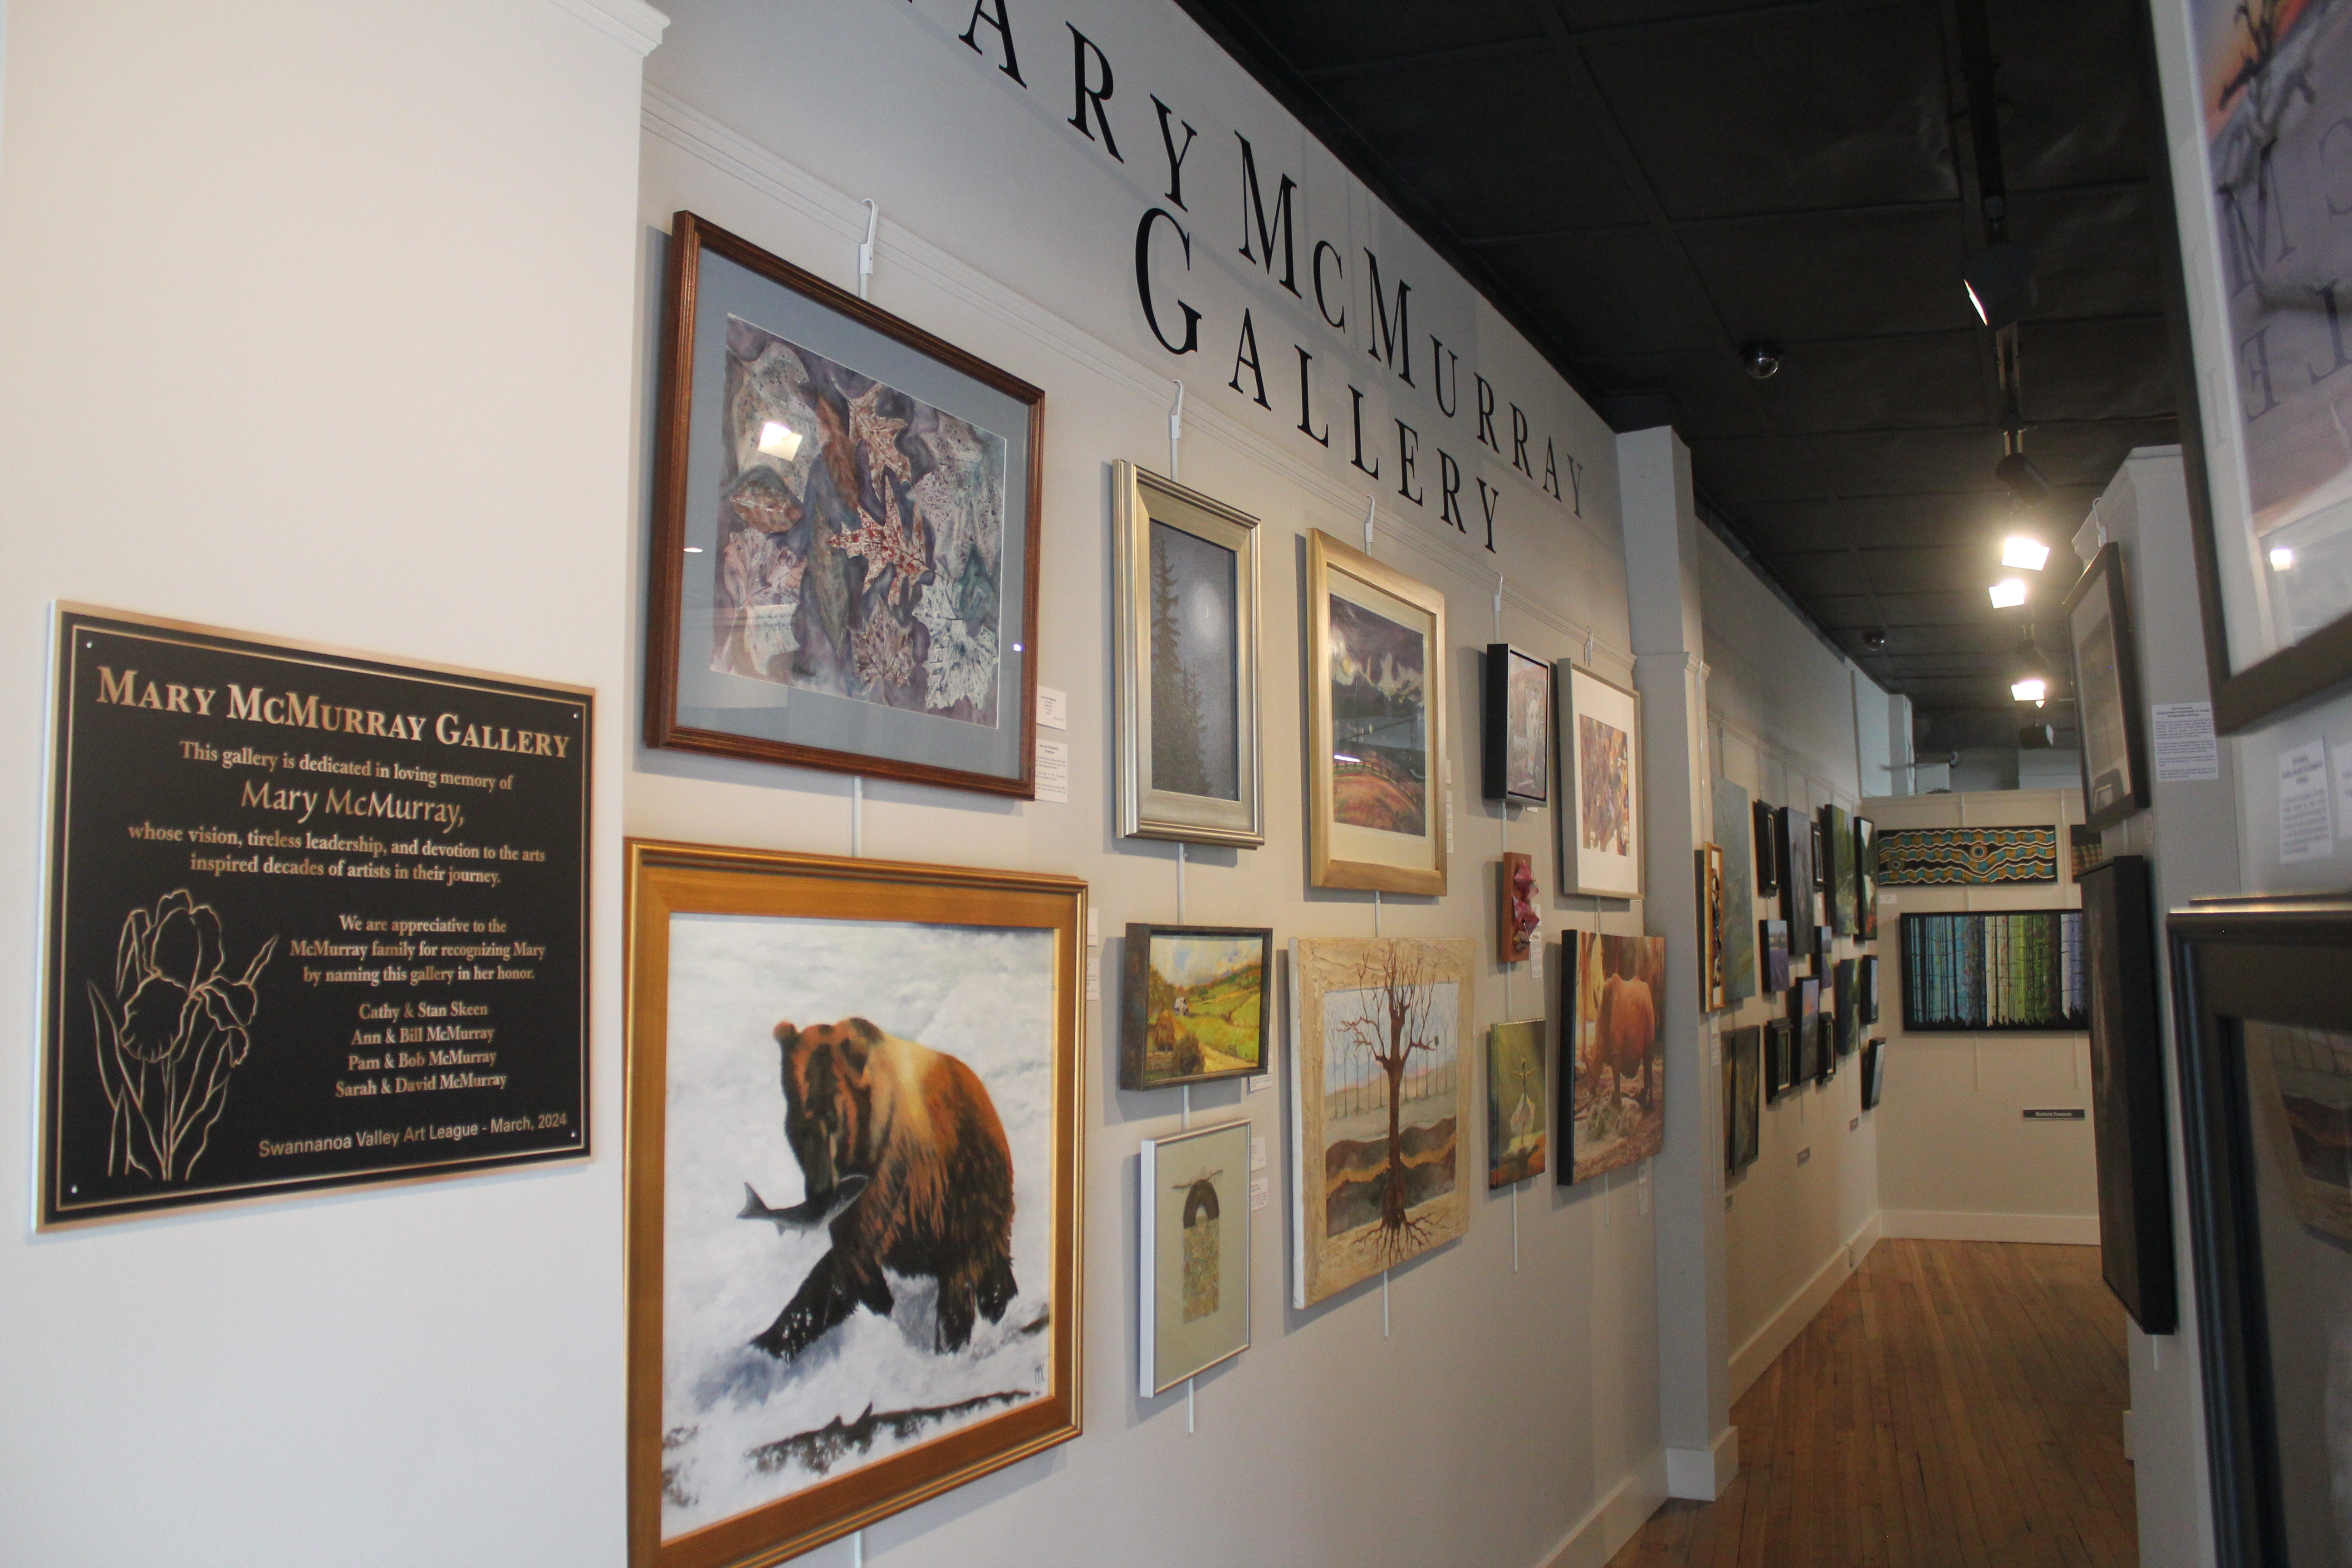 The Mary McMurray Gallery is located on the main floor of the Red House Gallery.